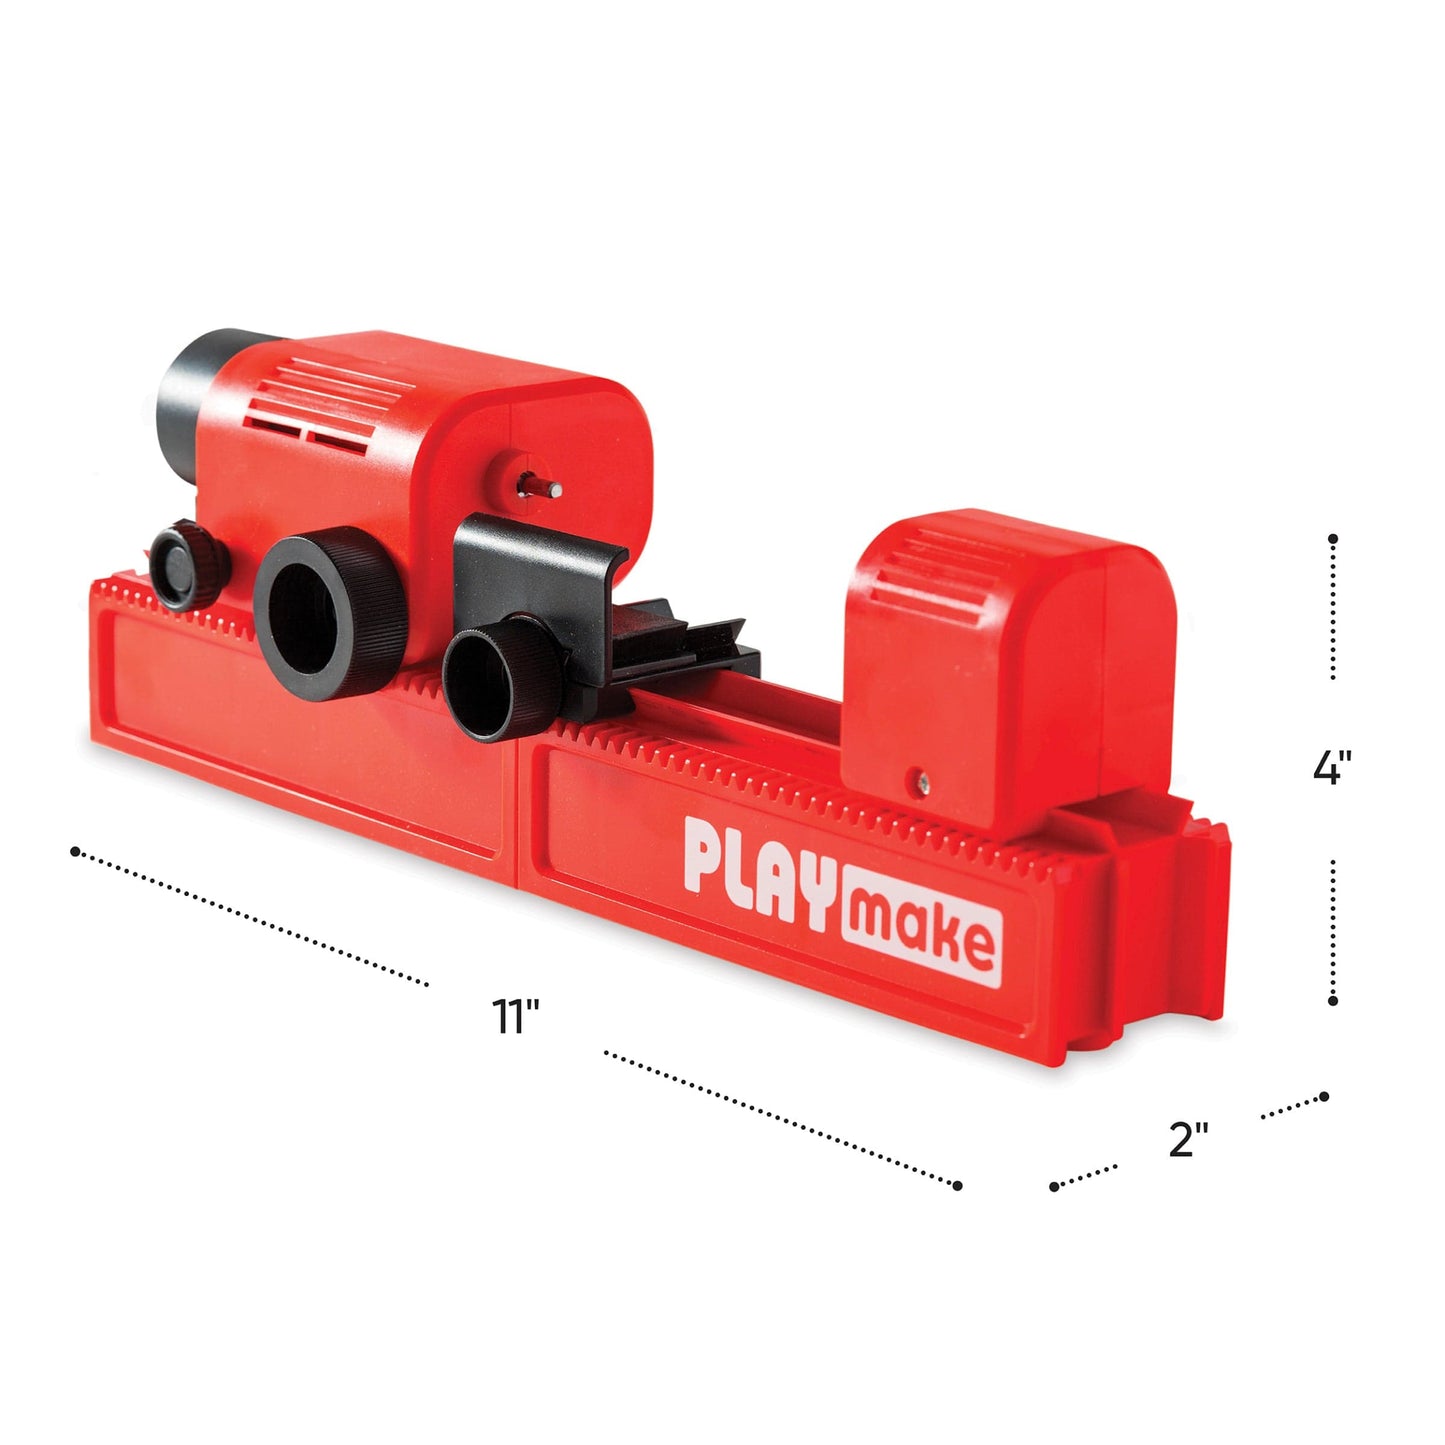 PLAYmake 4-in-1 Woodshop Carpentry Cool Tool